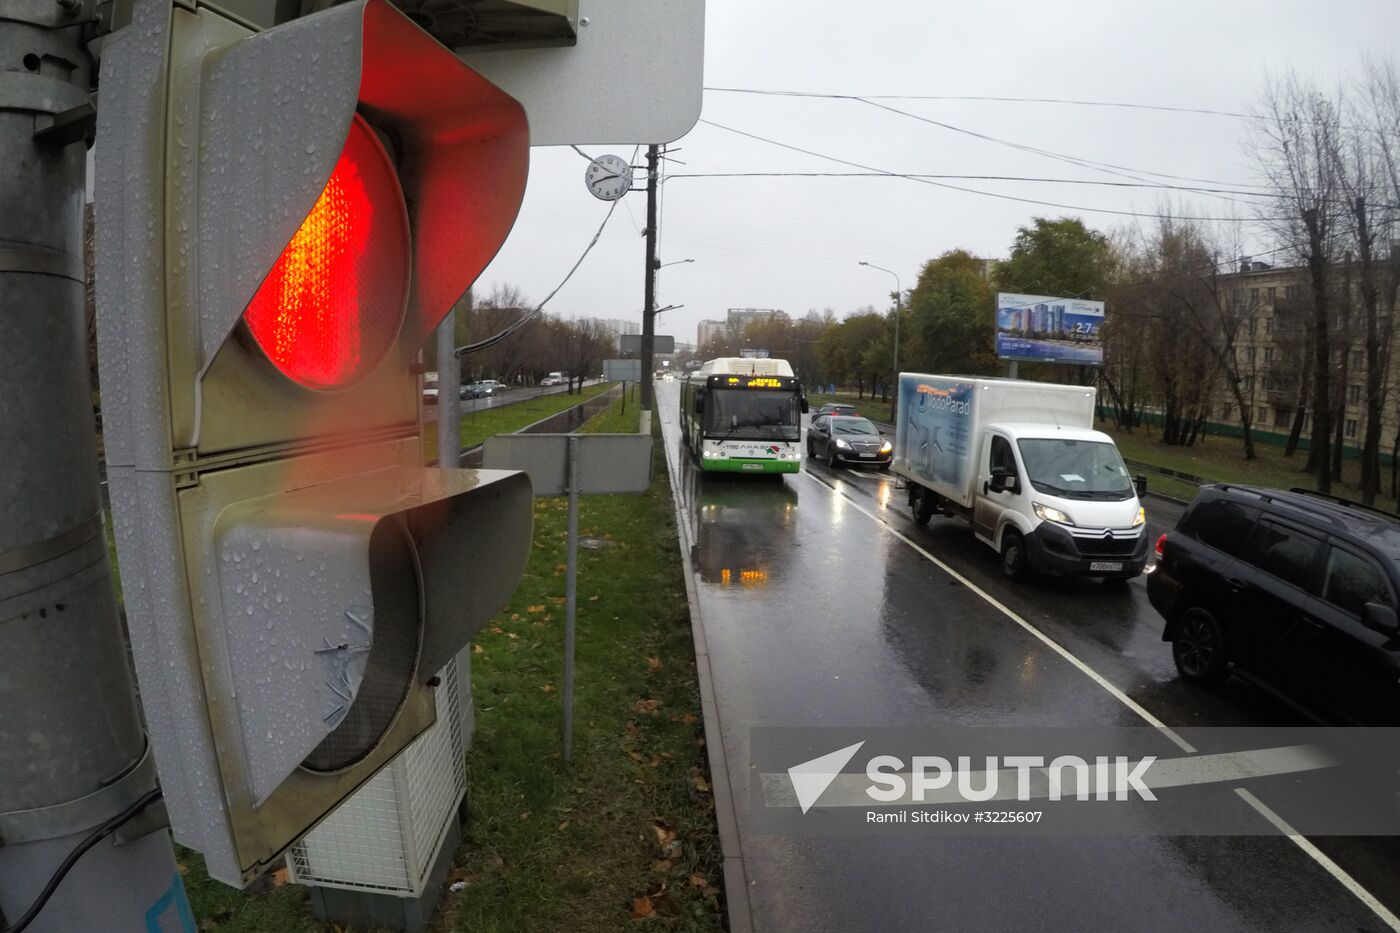 Traffic light installed as part of Russian-Japanese traffic light system introduction project